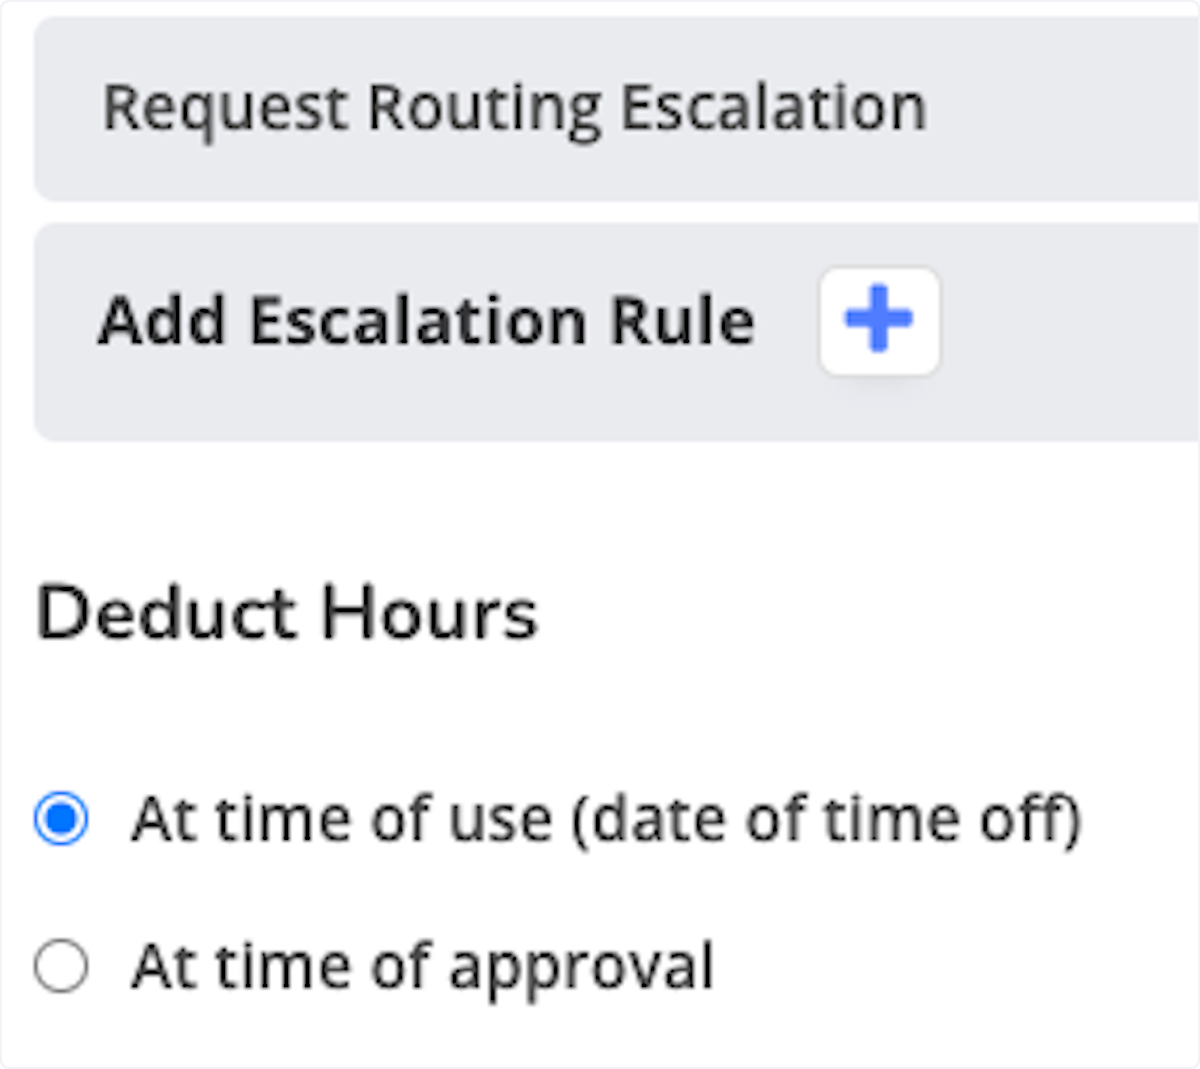 You can also enable the Escalation Rules. 
Determine how the hours will be deducted, either at the time of use or at the time of approval. 